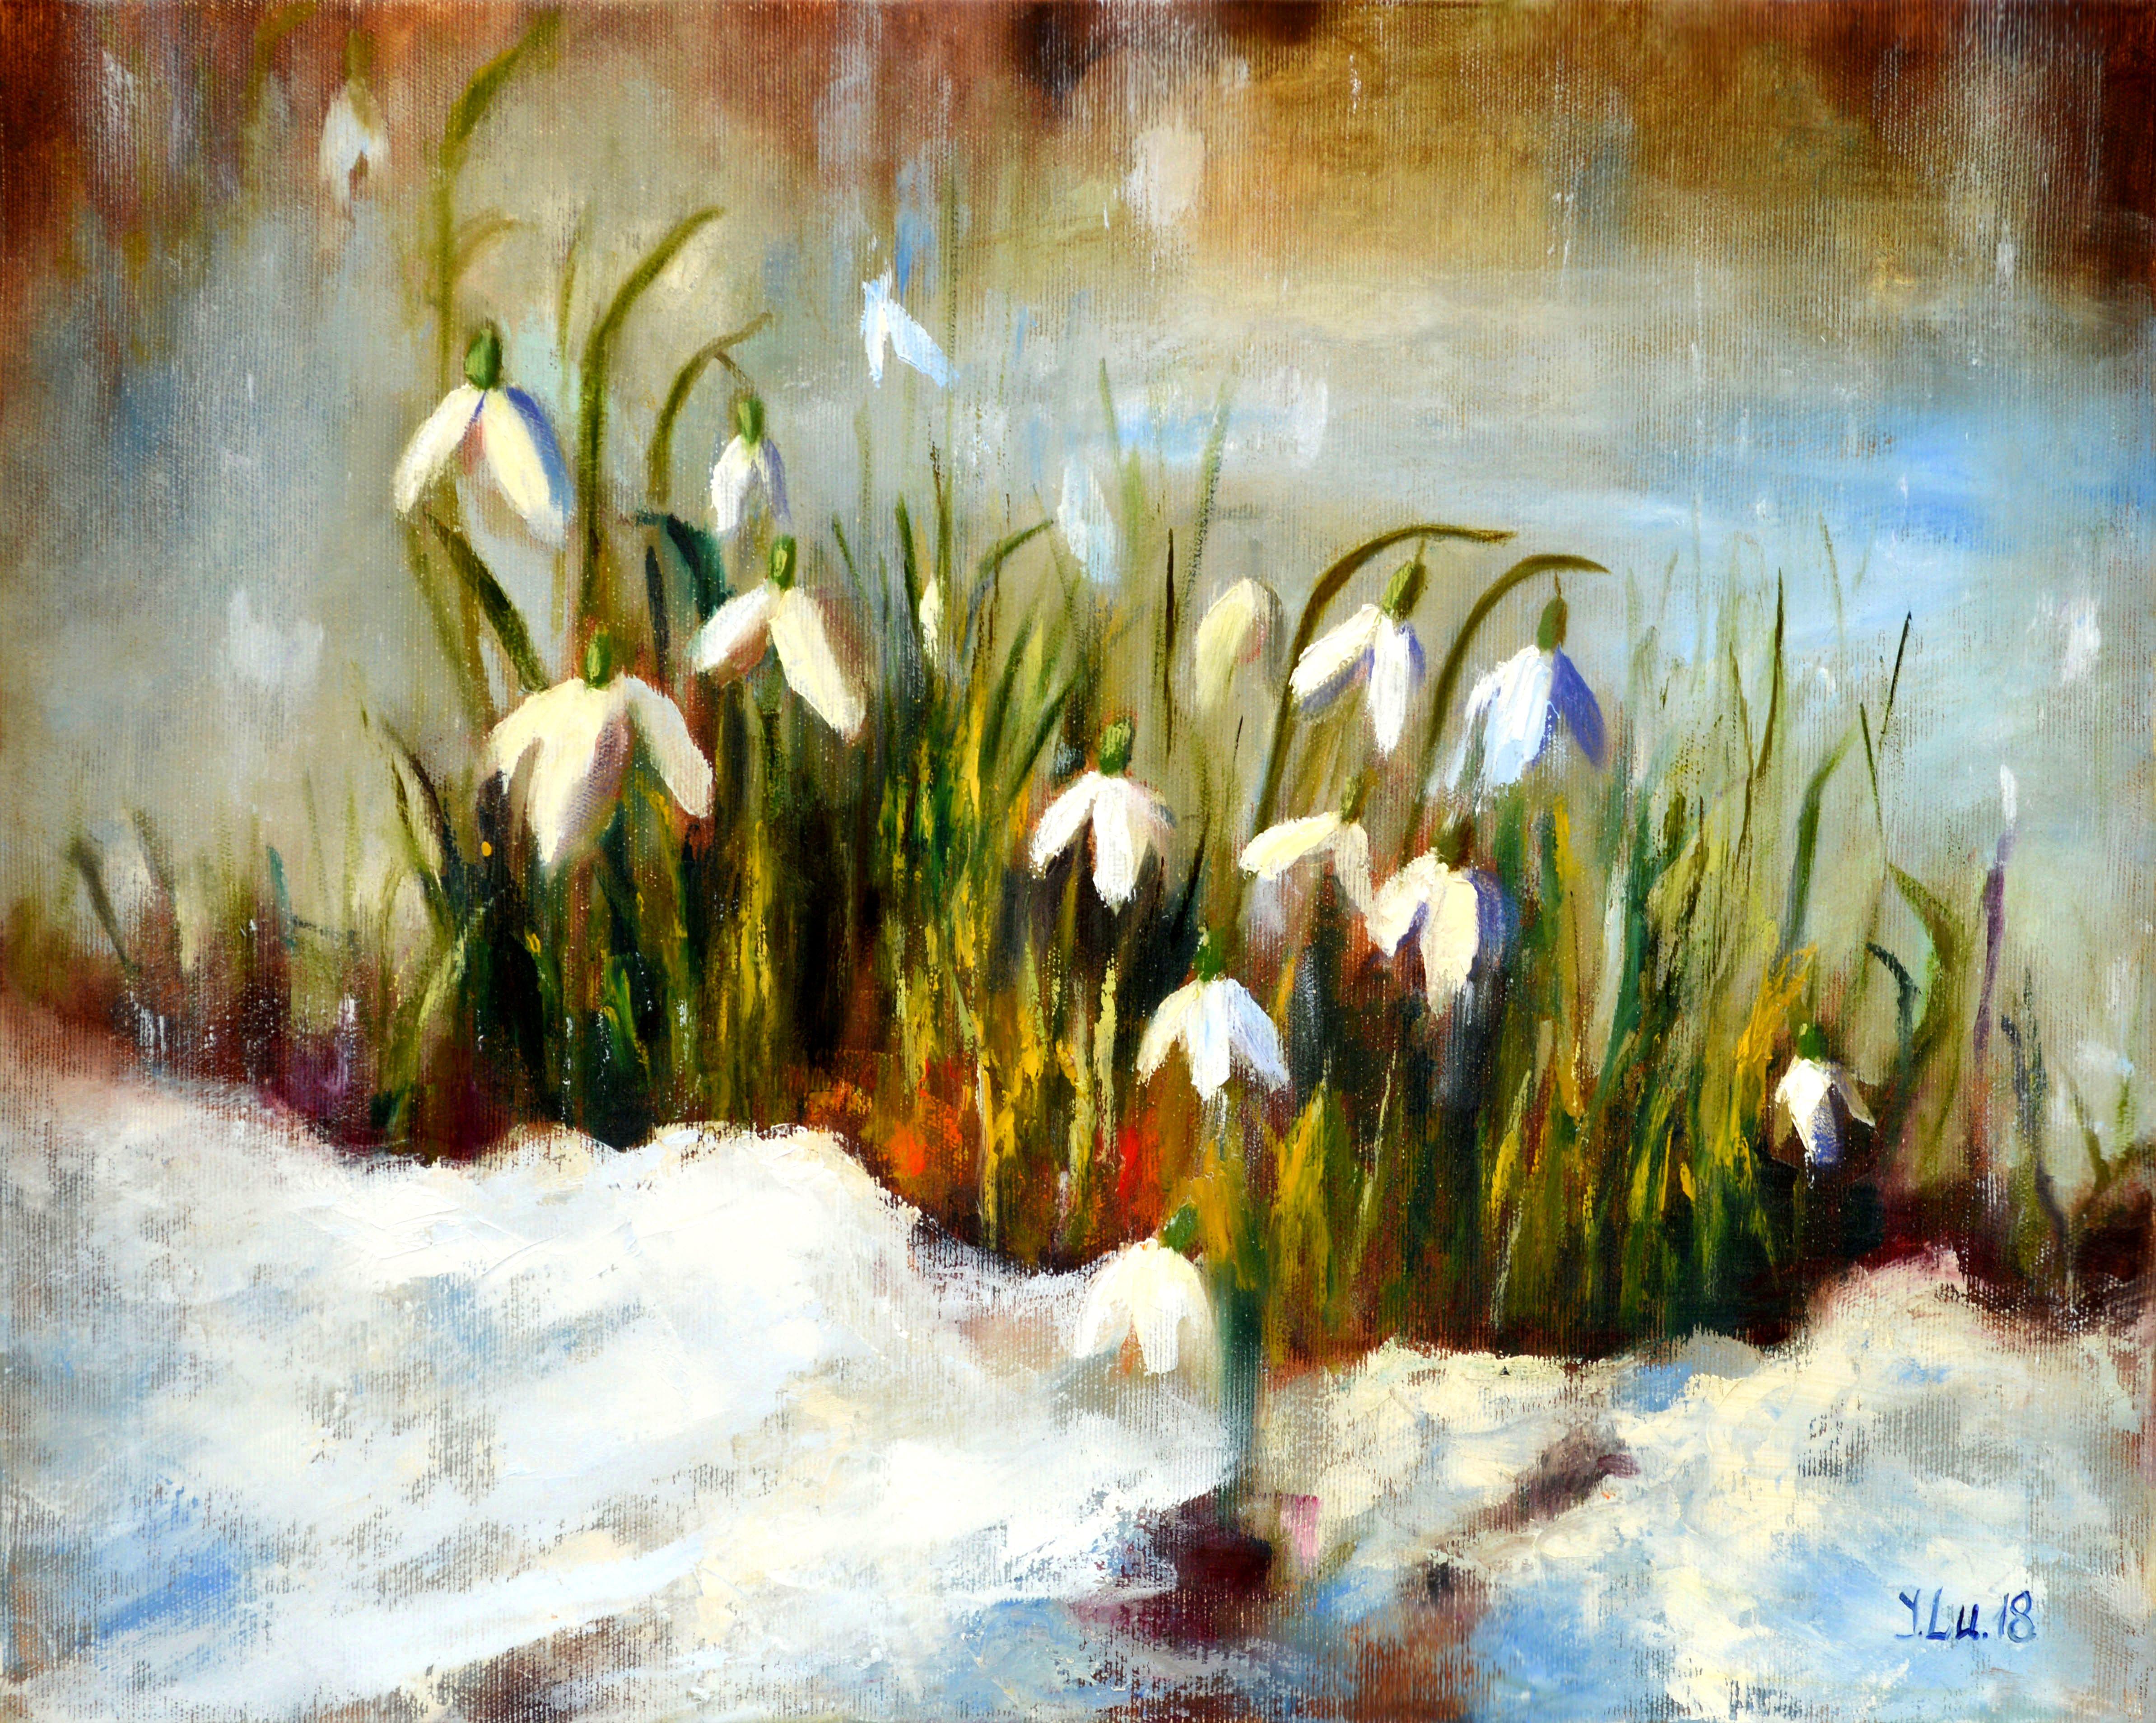 WINTER SALE! Snowdrops 40X50 oil painting